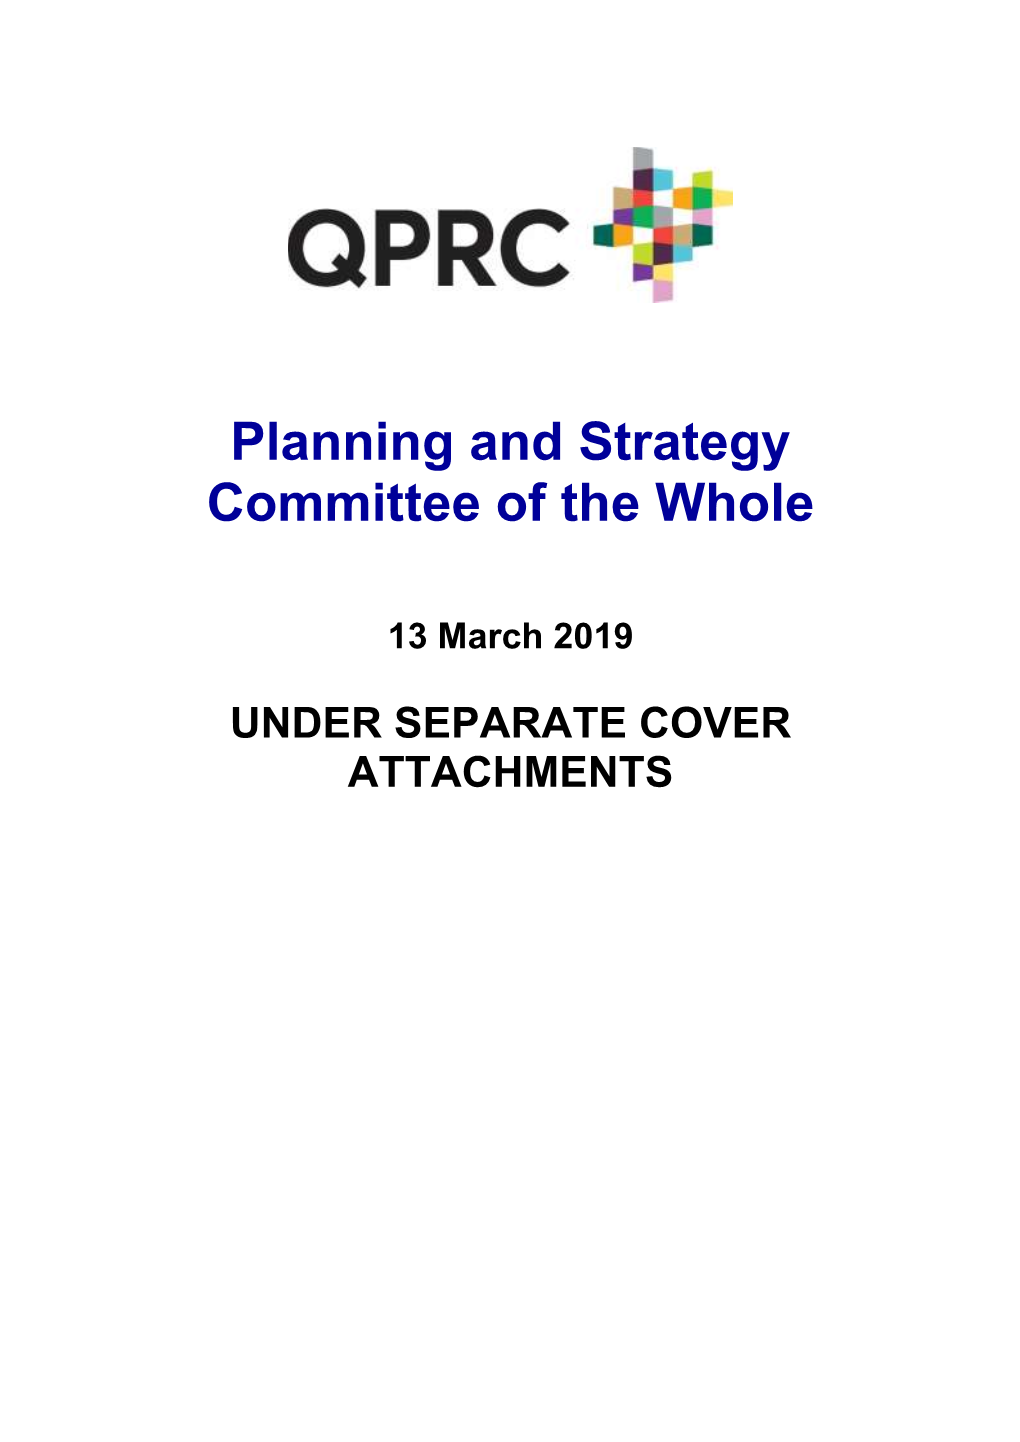 Attachments of Planning and Strategy Committee of the Whole